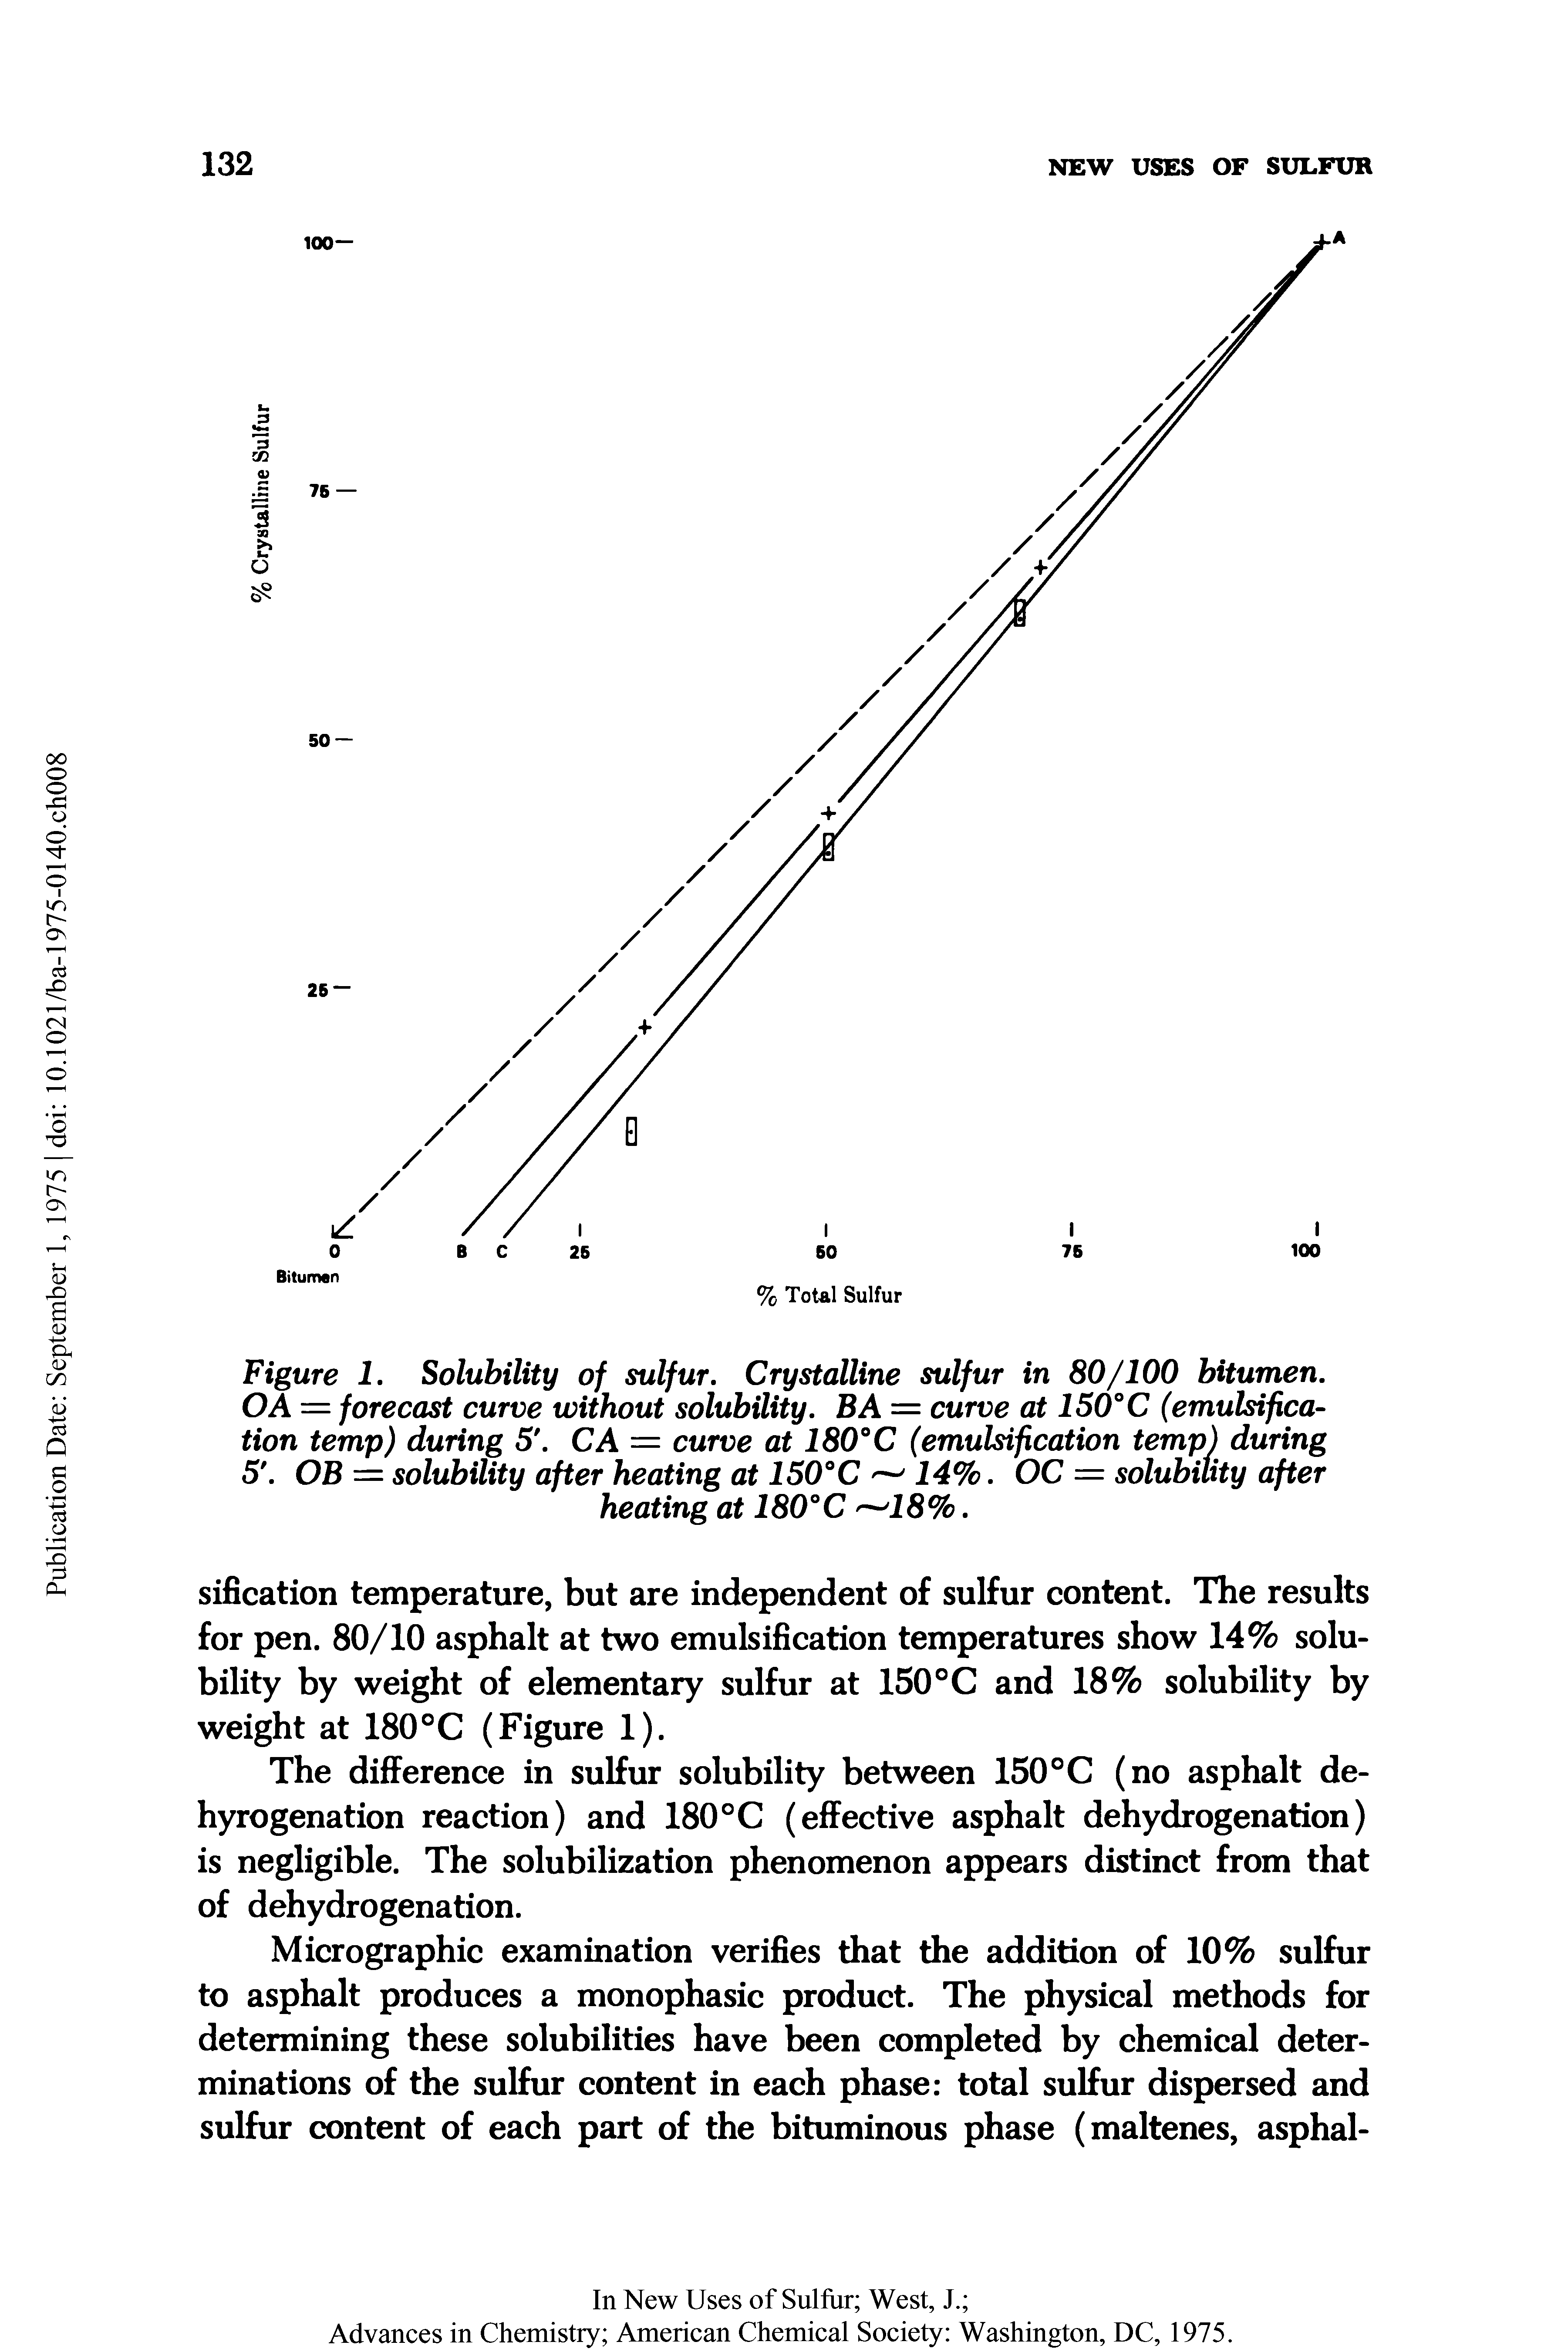 Figure 1. Solubility of sulfur. Crystalline sulfur in 80/100 bitumen. OA = forecast curve without solubility. BA = curve at 150°C (emulsification temp) during 5 CA = curve at 180°C (emulsification temp) during 5. OB = solubility after heating at 150°C — 14%. OC = solubility after heating at 180°C —18%.